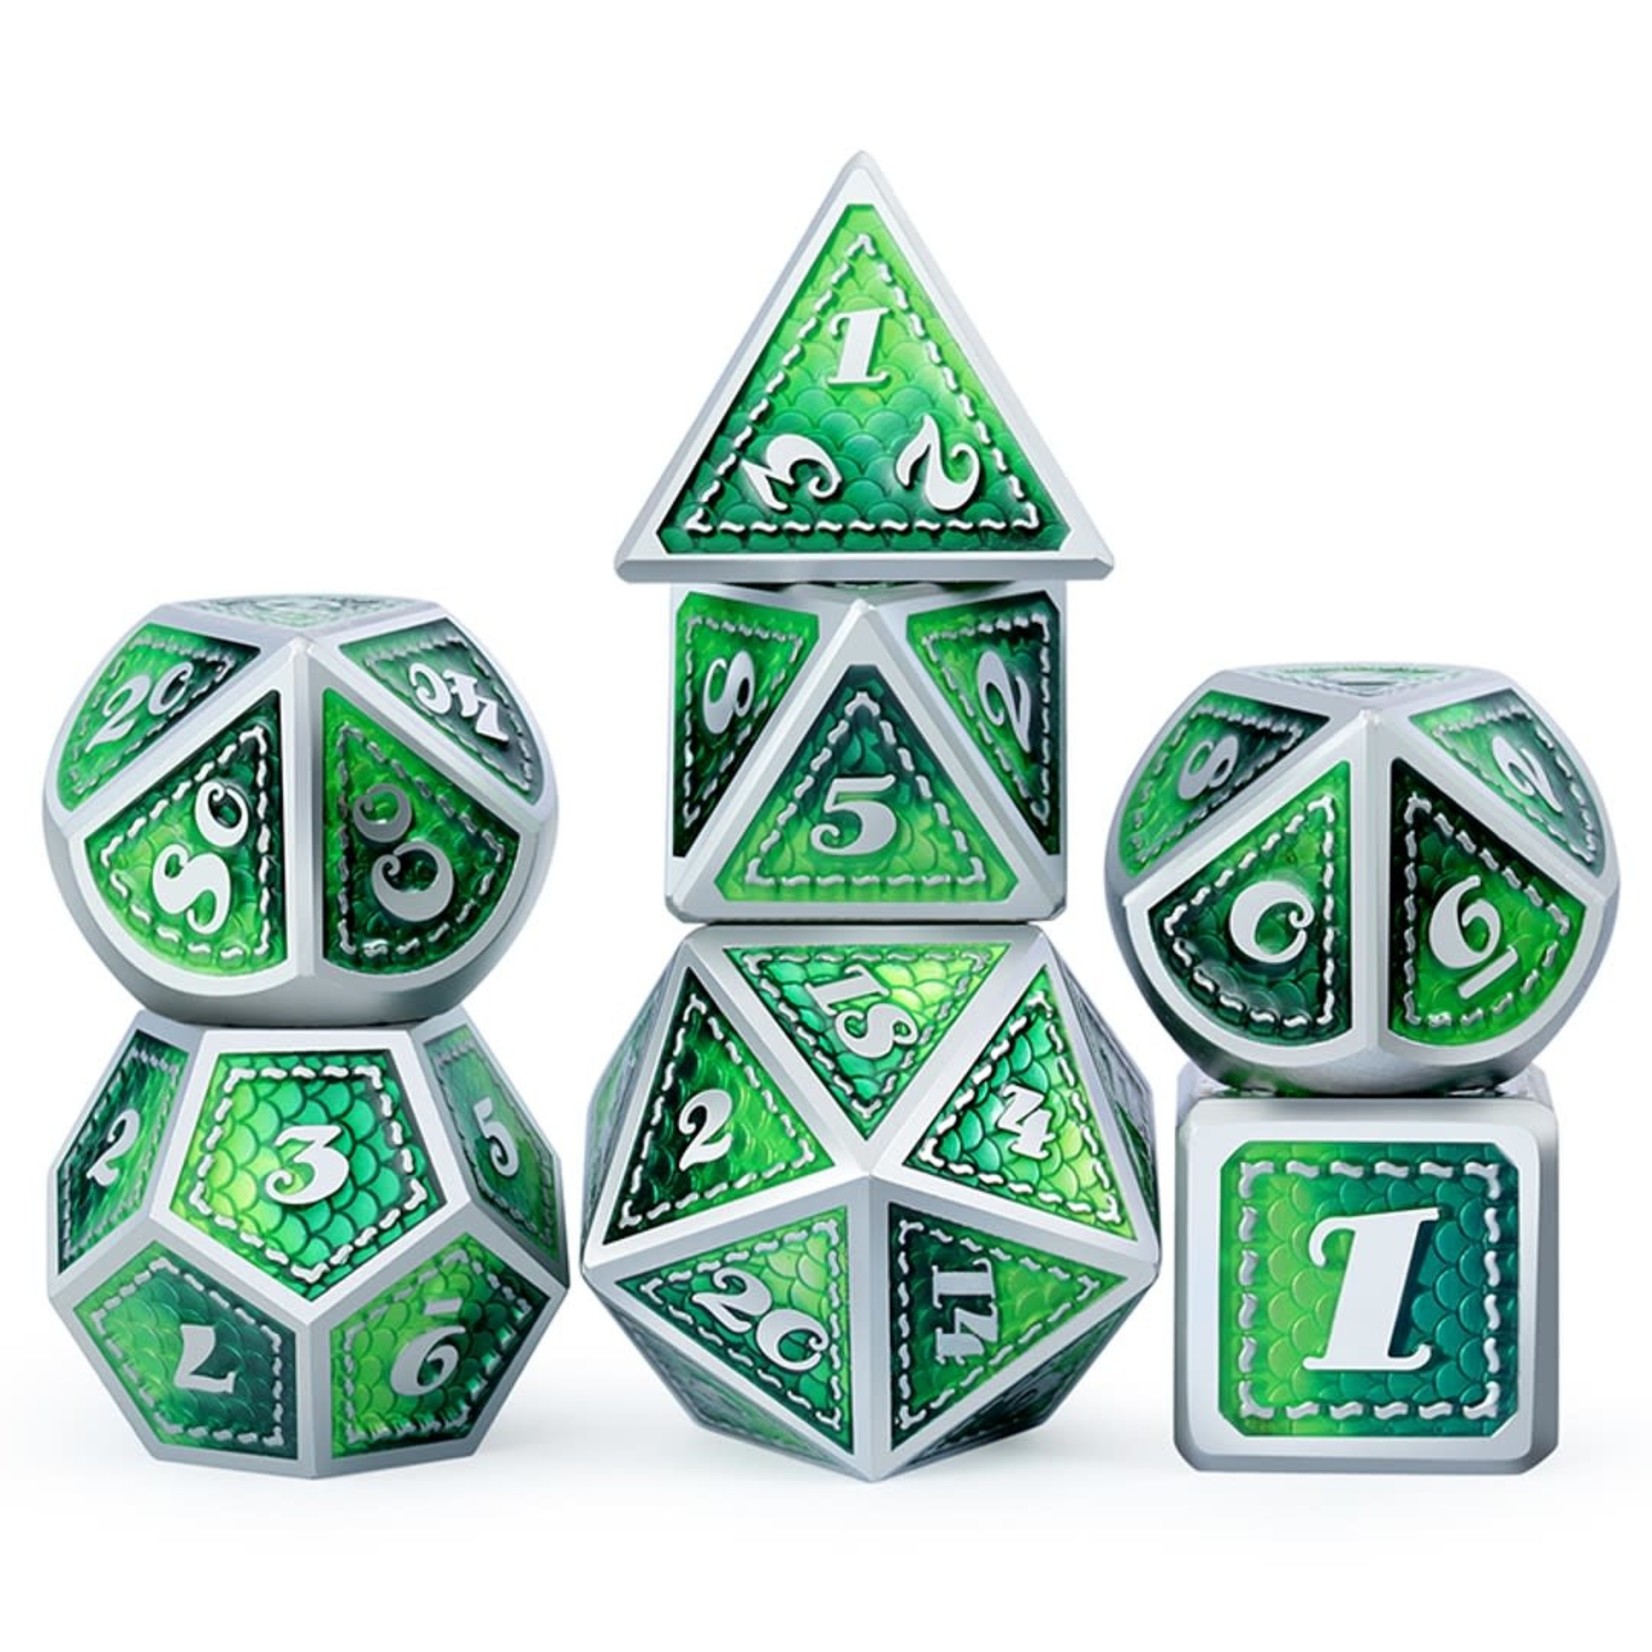 Dice Habit Dragon Green with Silver Polyhedral 7 die set